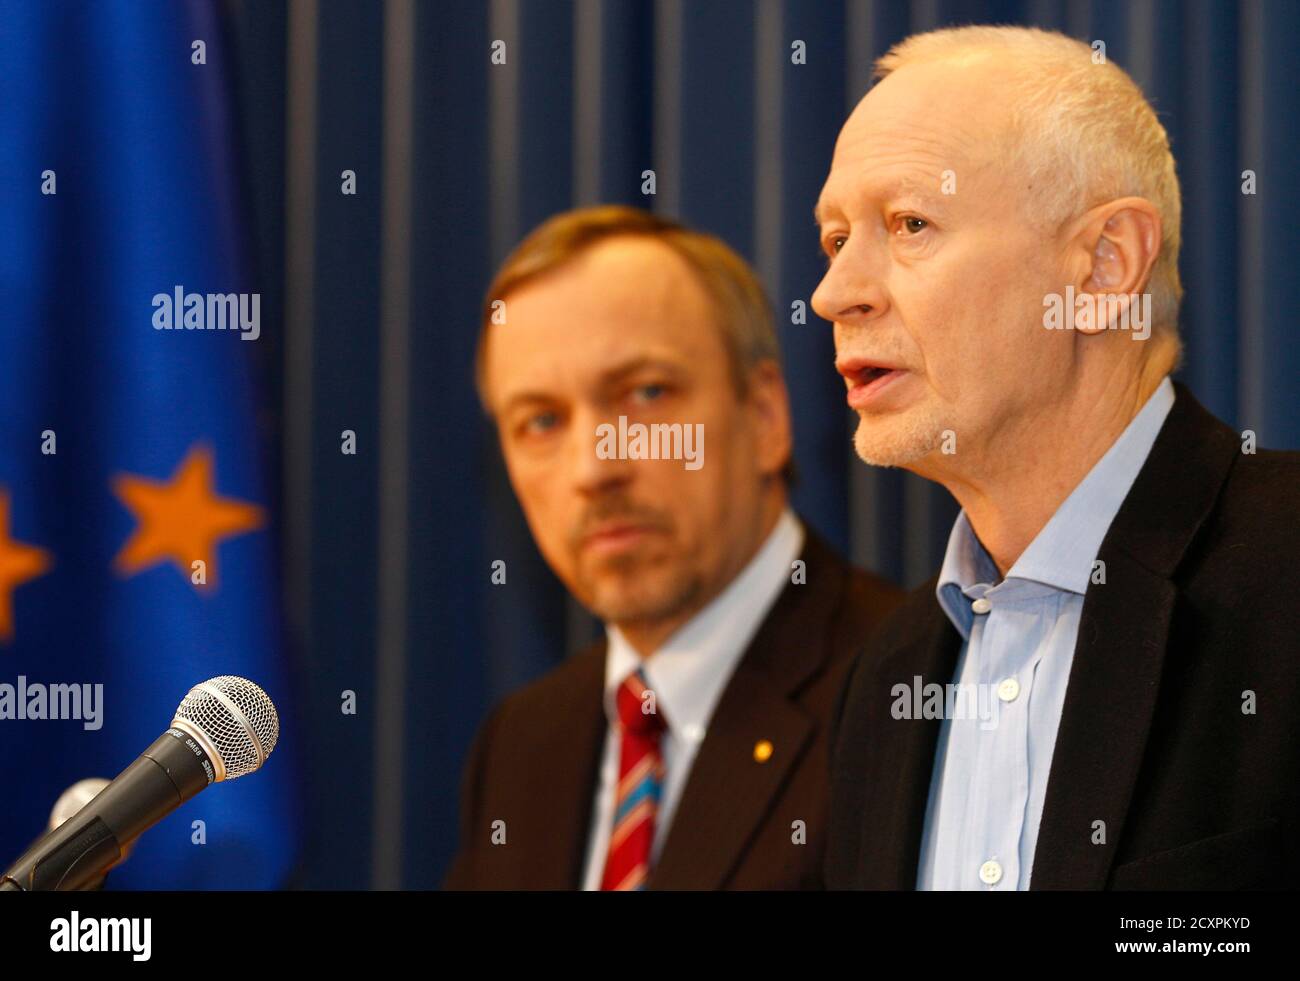 Poland's Minister of Culture Bogdan Zdrojewski and Government Minister Michal Boni (R) speak to the media at a news conference regarding the hackers attack on government websites at the Prime Ministers Chancellery in Warsaw January 23, 2012. Hackers from the Anonymous group blocked numerous websites of Polish authorities on Saturday, barring access to the internet sites of the parliament, the Prime Minister and the President to protest against Warsaw's plans of signing the ACTA agreement that aims to protect intellectual rights, Rzeczpospolita daily reported. REUTERS/Peter Andrews (POLAND - Ta Stock Photo